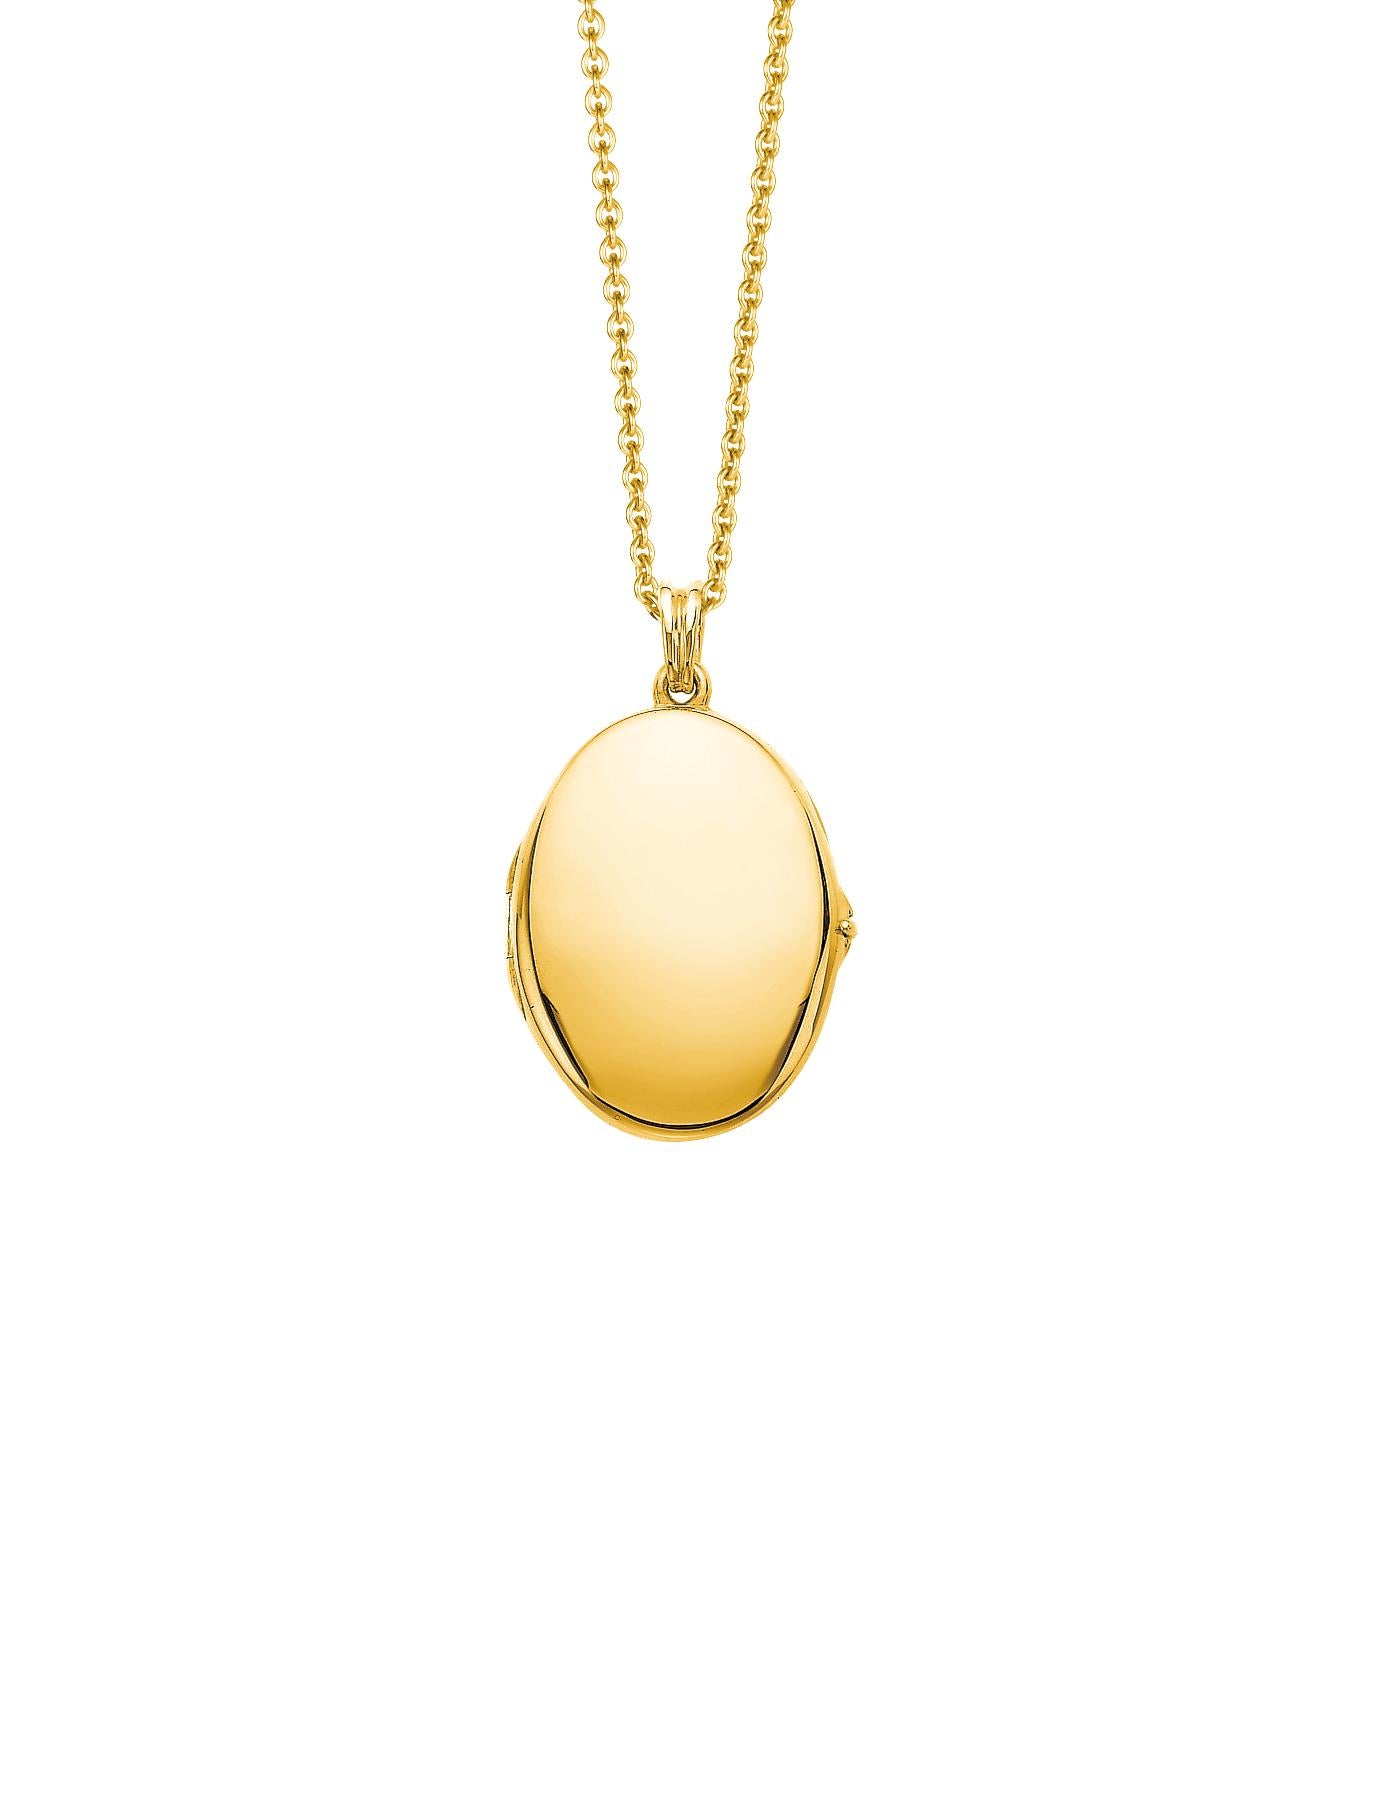 Victor Mayer customizable oval pendant locket 18k yellow gold, Hallmark Collection, measurements app. 23.0 mm x 32.0 mm

About the creator Victor Mayer
Victor Mayer is internationally renowned for elegant timeless designs and unrivalled expertise in